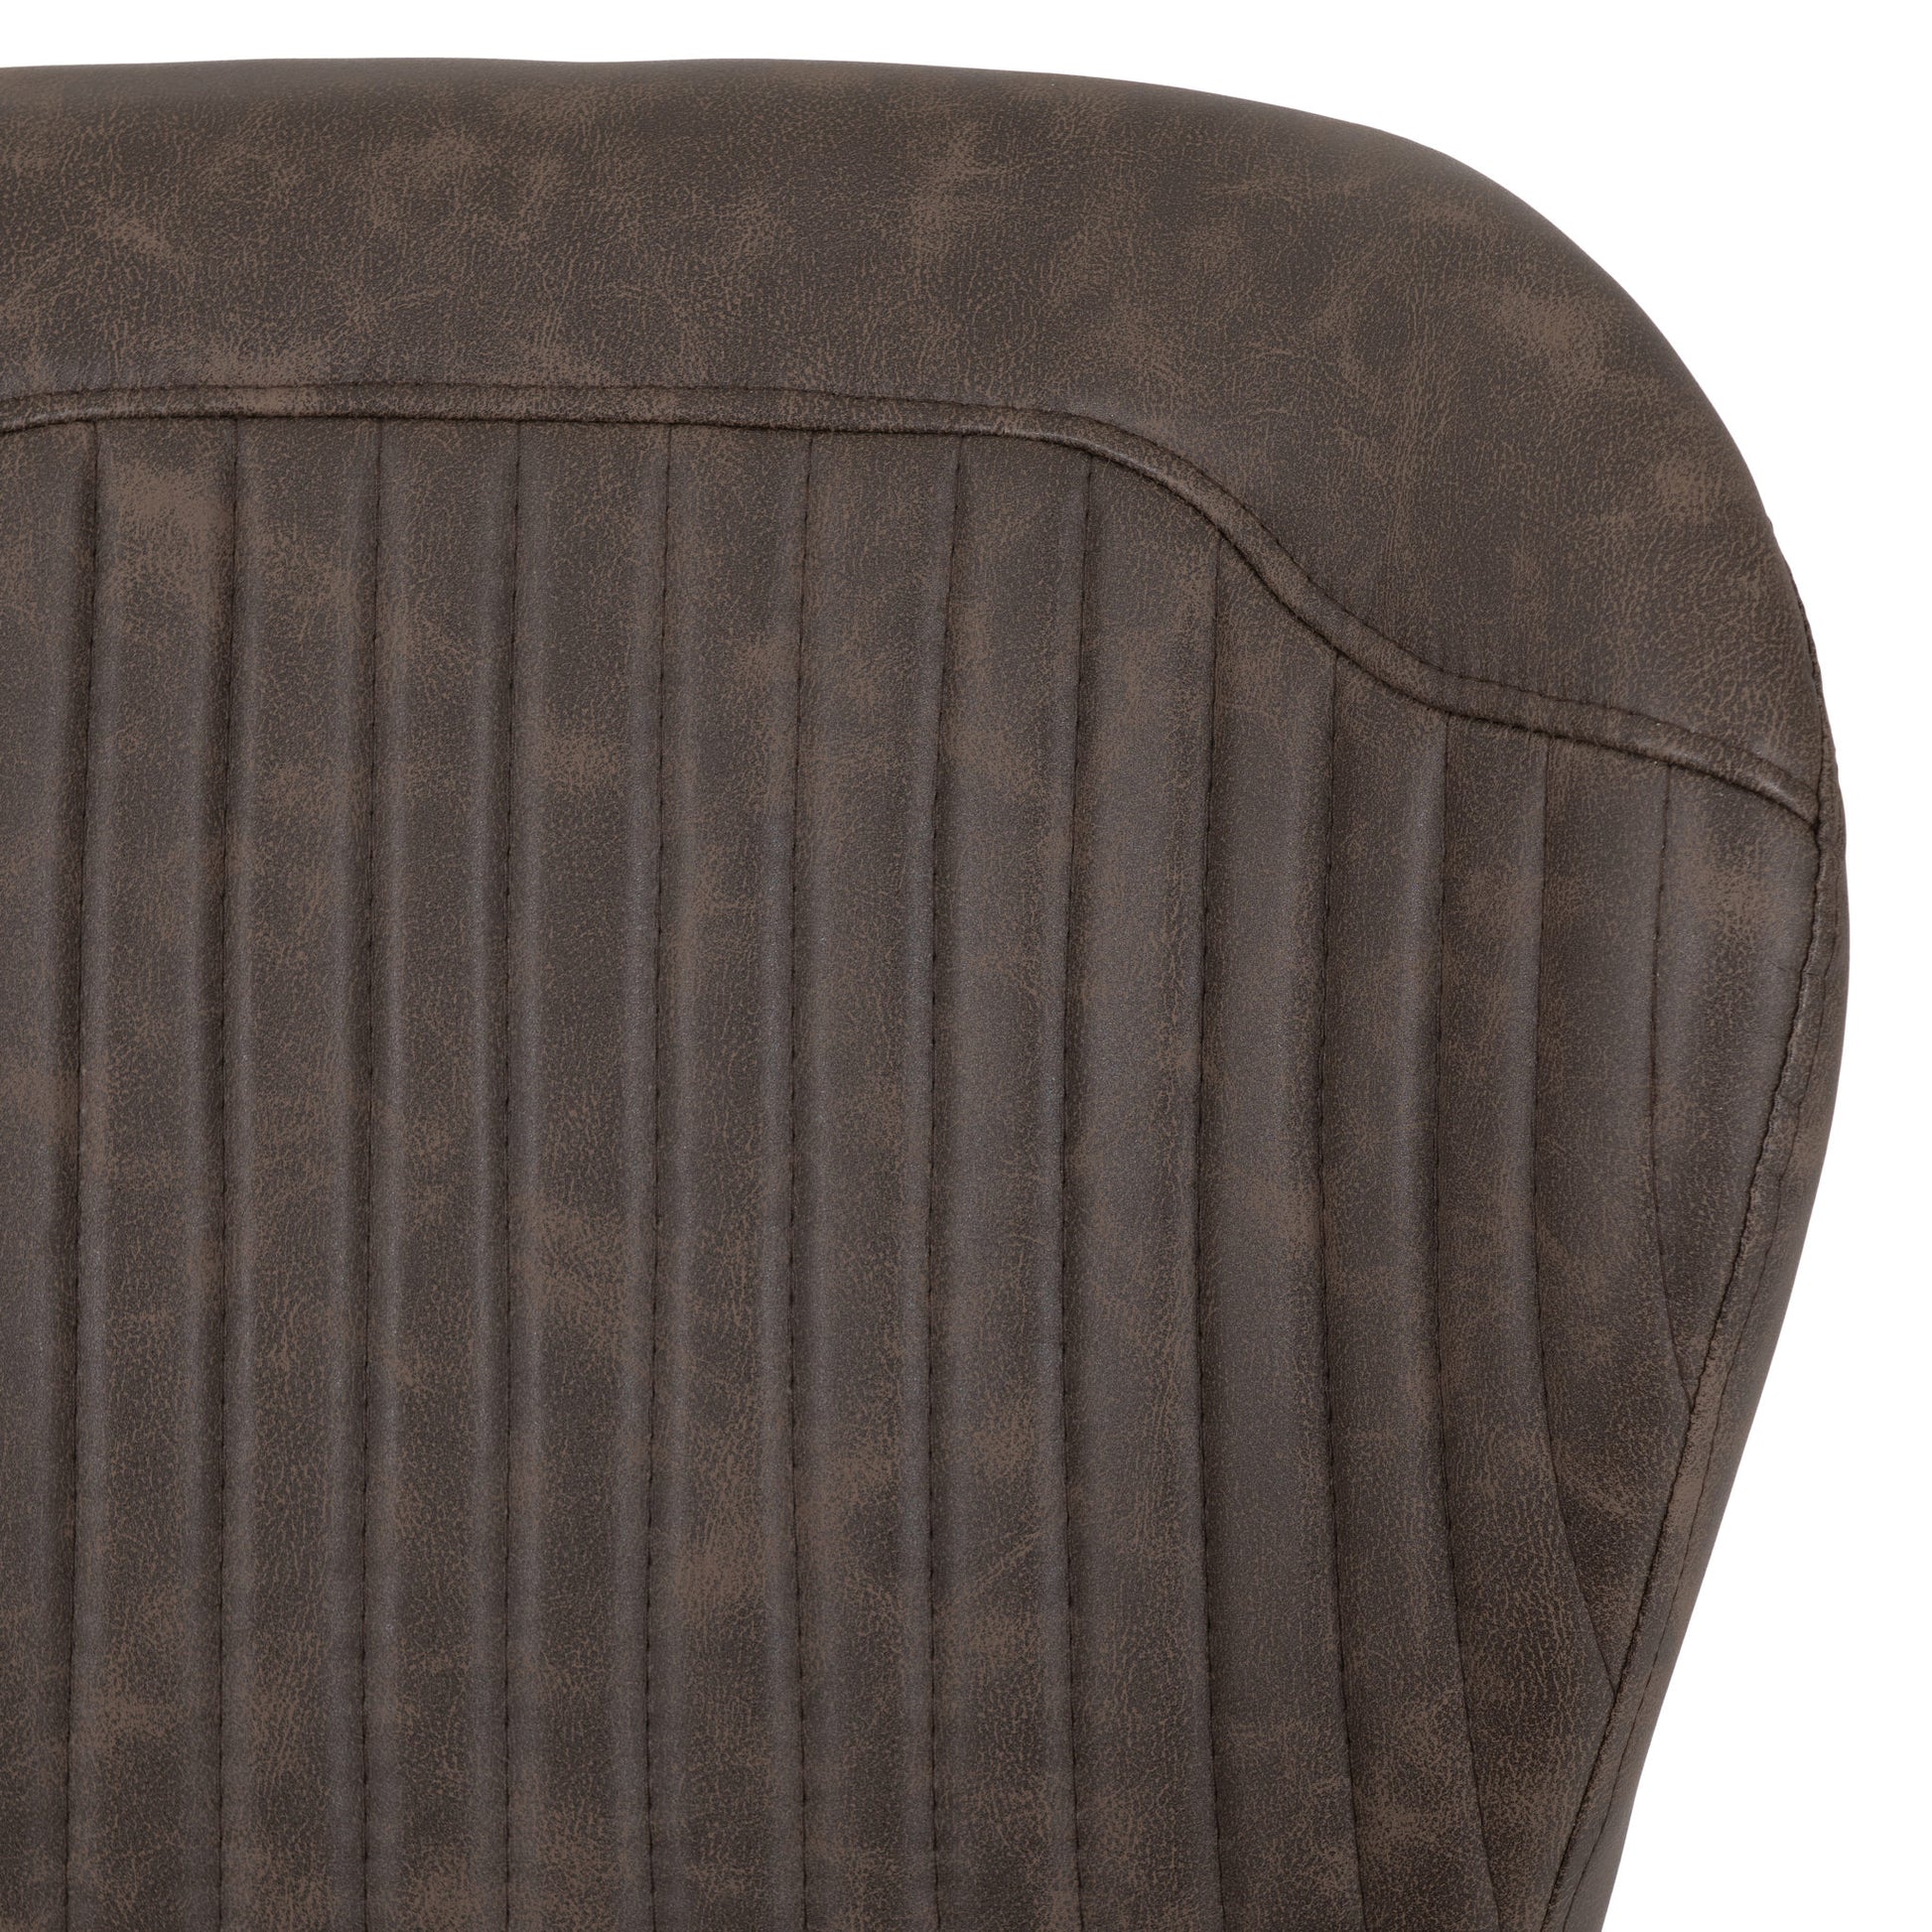 QUEBEC-DINING-CHAIR-BROWN-PU-2020-400-402-103-01-scaled.jpg